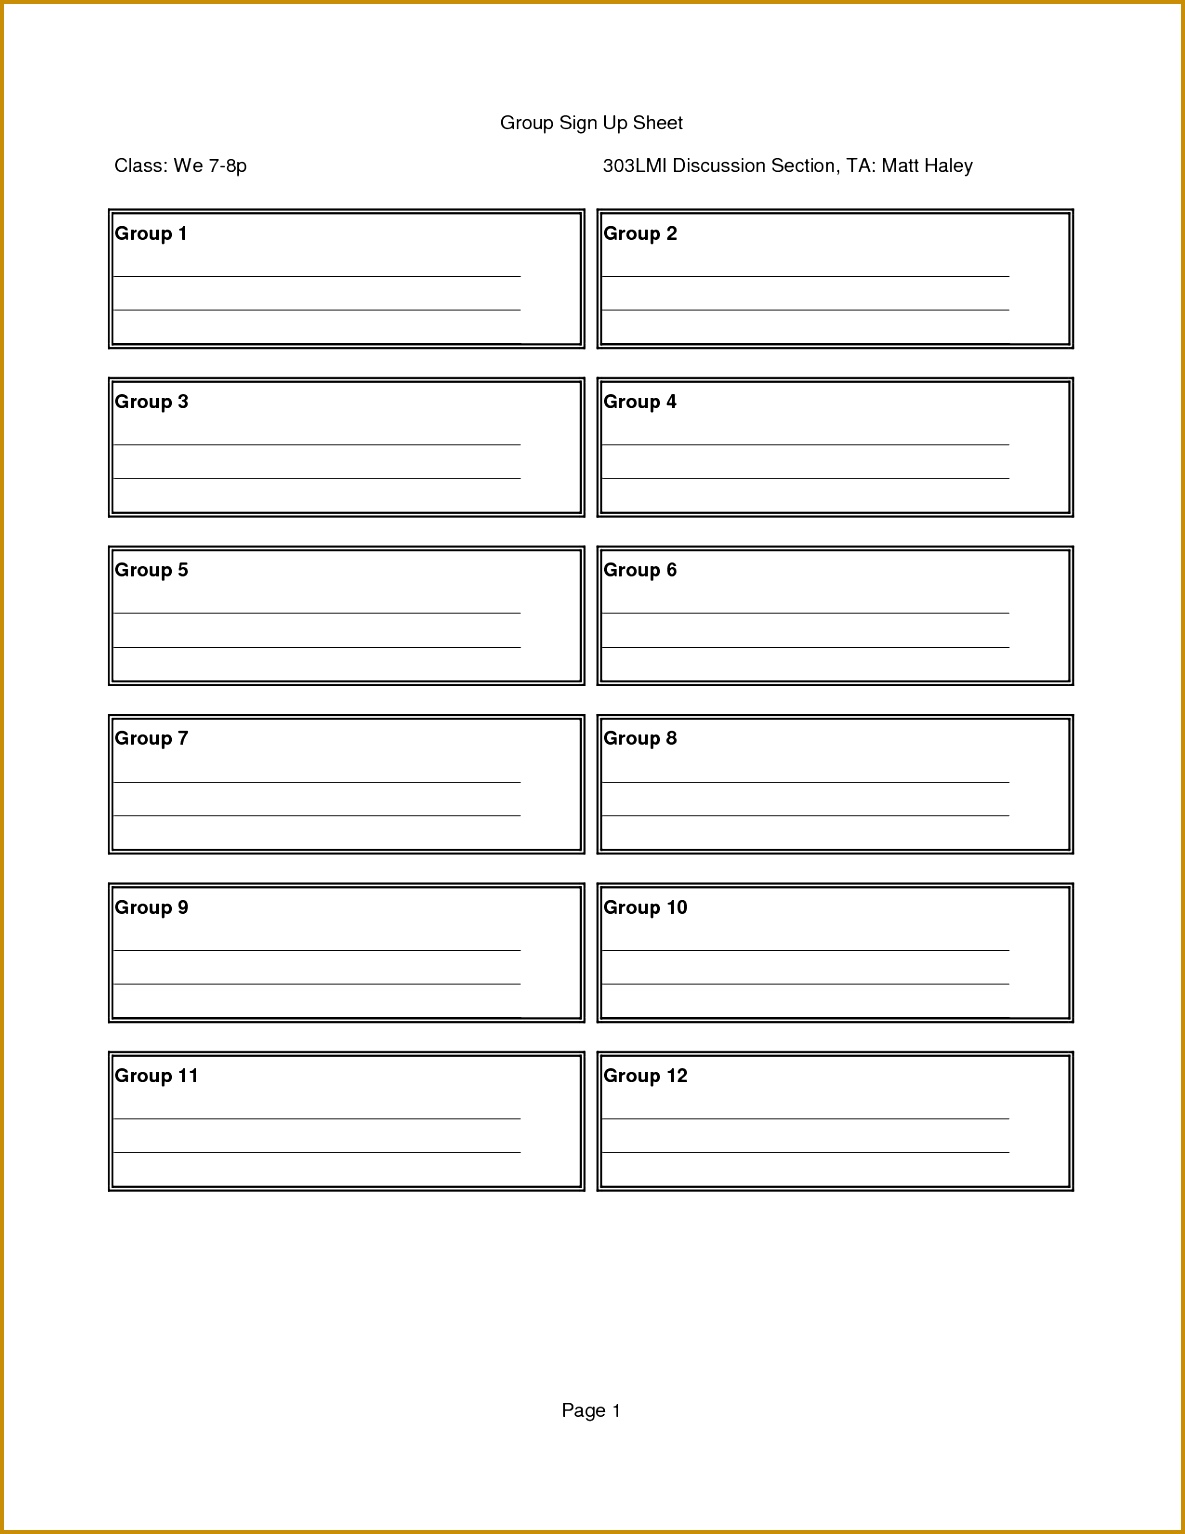 Awesome Group Sign Up Sheet Template Blank Sample Vlashed Sheets Replacethis Group Sign Up Sheet Template 11851534